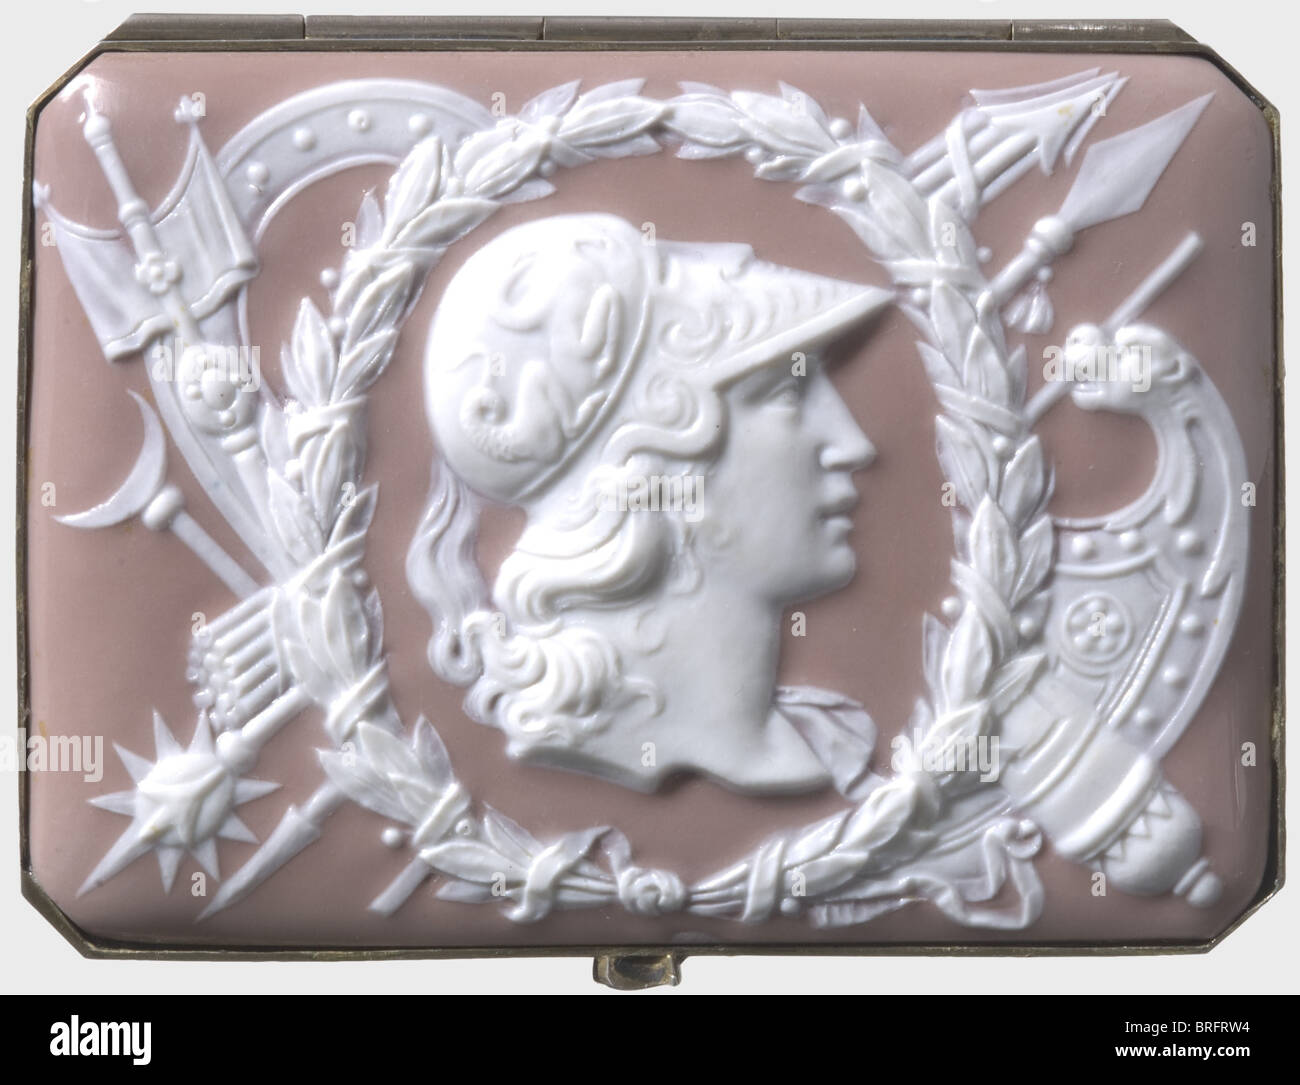 A snuff box, made by the Meissen Factory, end of the 19th century. Cameo type porcelain in relief, trophy compositions finished in mauve colours. Silver setting with remnants of gilding, hallmarked, '800' and 'VM'. A sword mark in underglaze on the back, half hidden by the hinge frame. Dimensions 90 x 65 x 40 mm. historic, historical, 19th century, handicrafts, handcraft, craft, object, objects, stills, clipping, clippings, cut out, cut-out, cut-outs, Additional-Rights-Clearences-Not Available Stock Photo